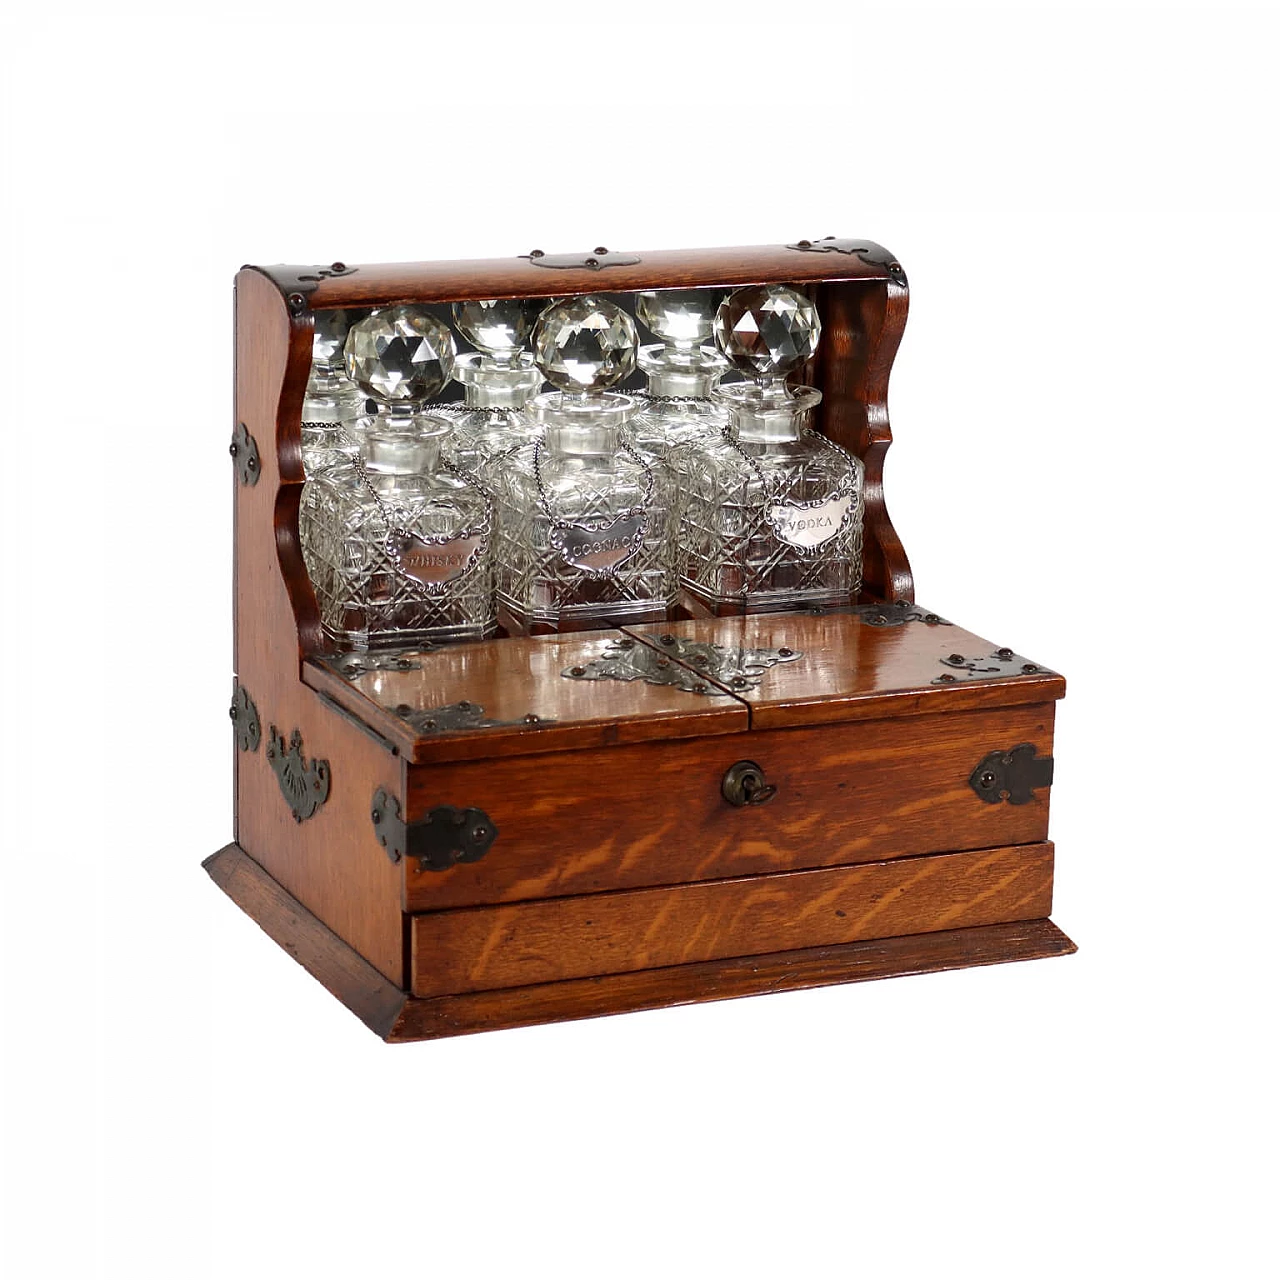 Liquor box with crystal glasses and bottles 1